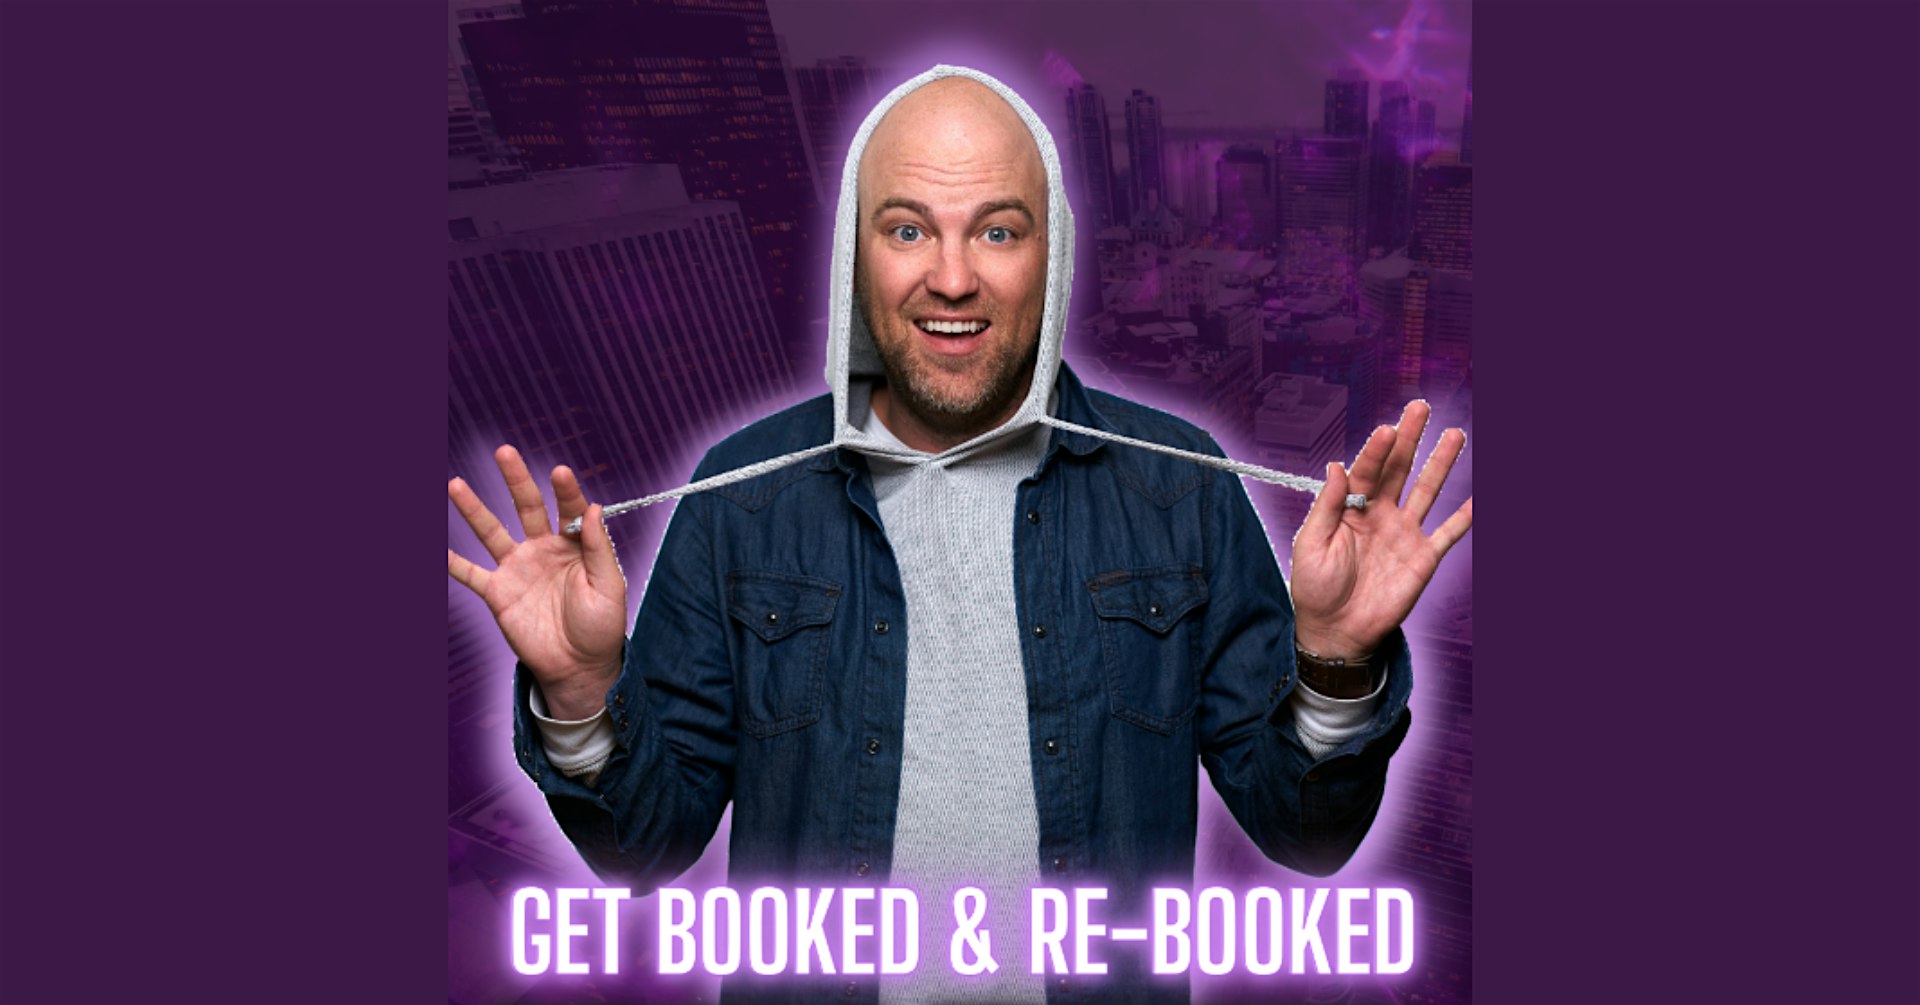 Get Booked & Re-Booked